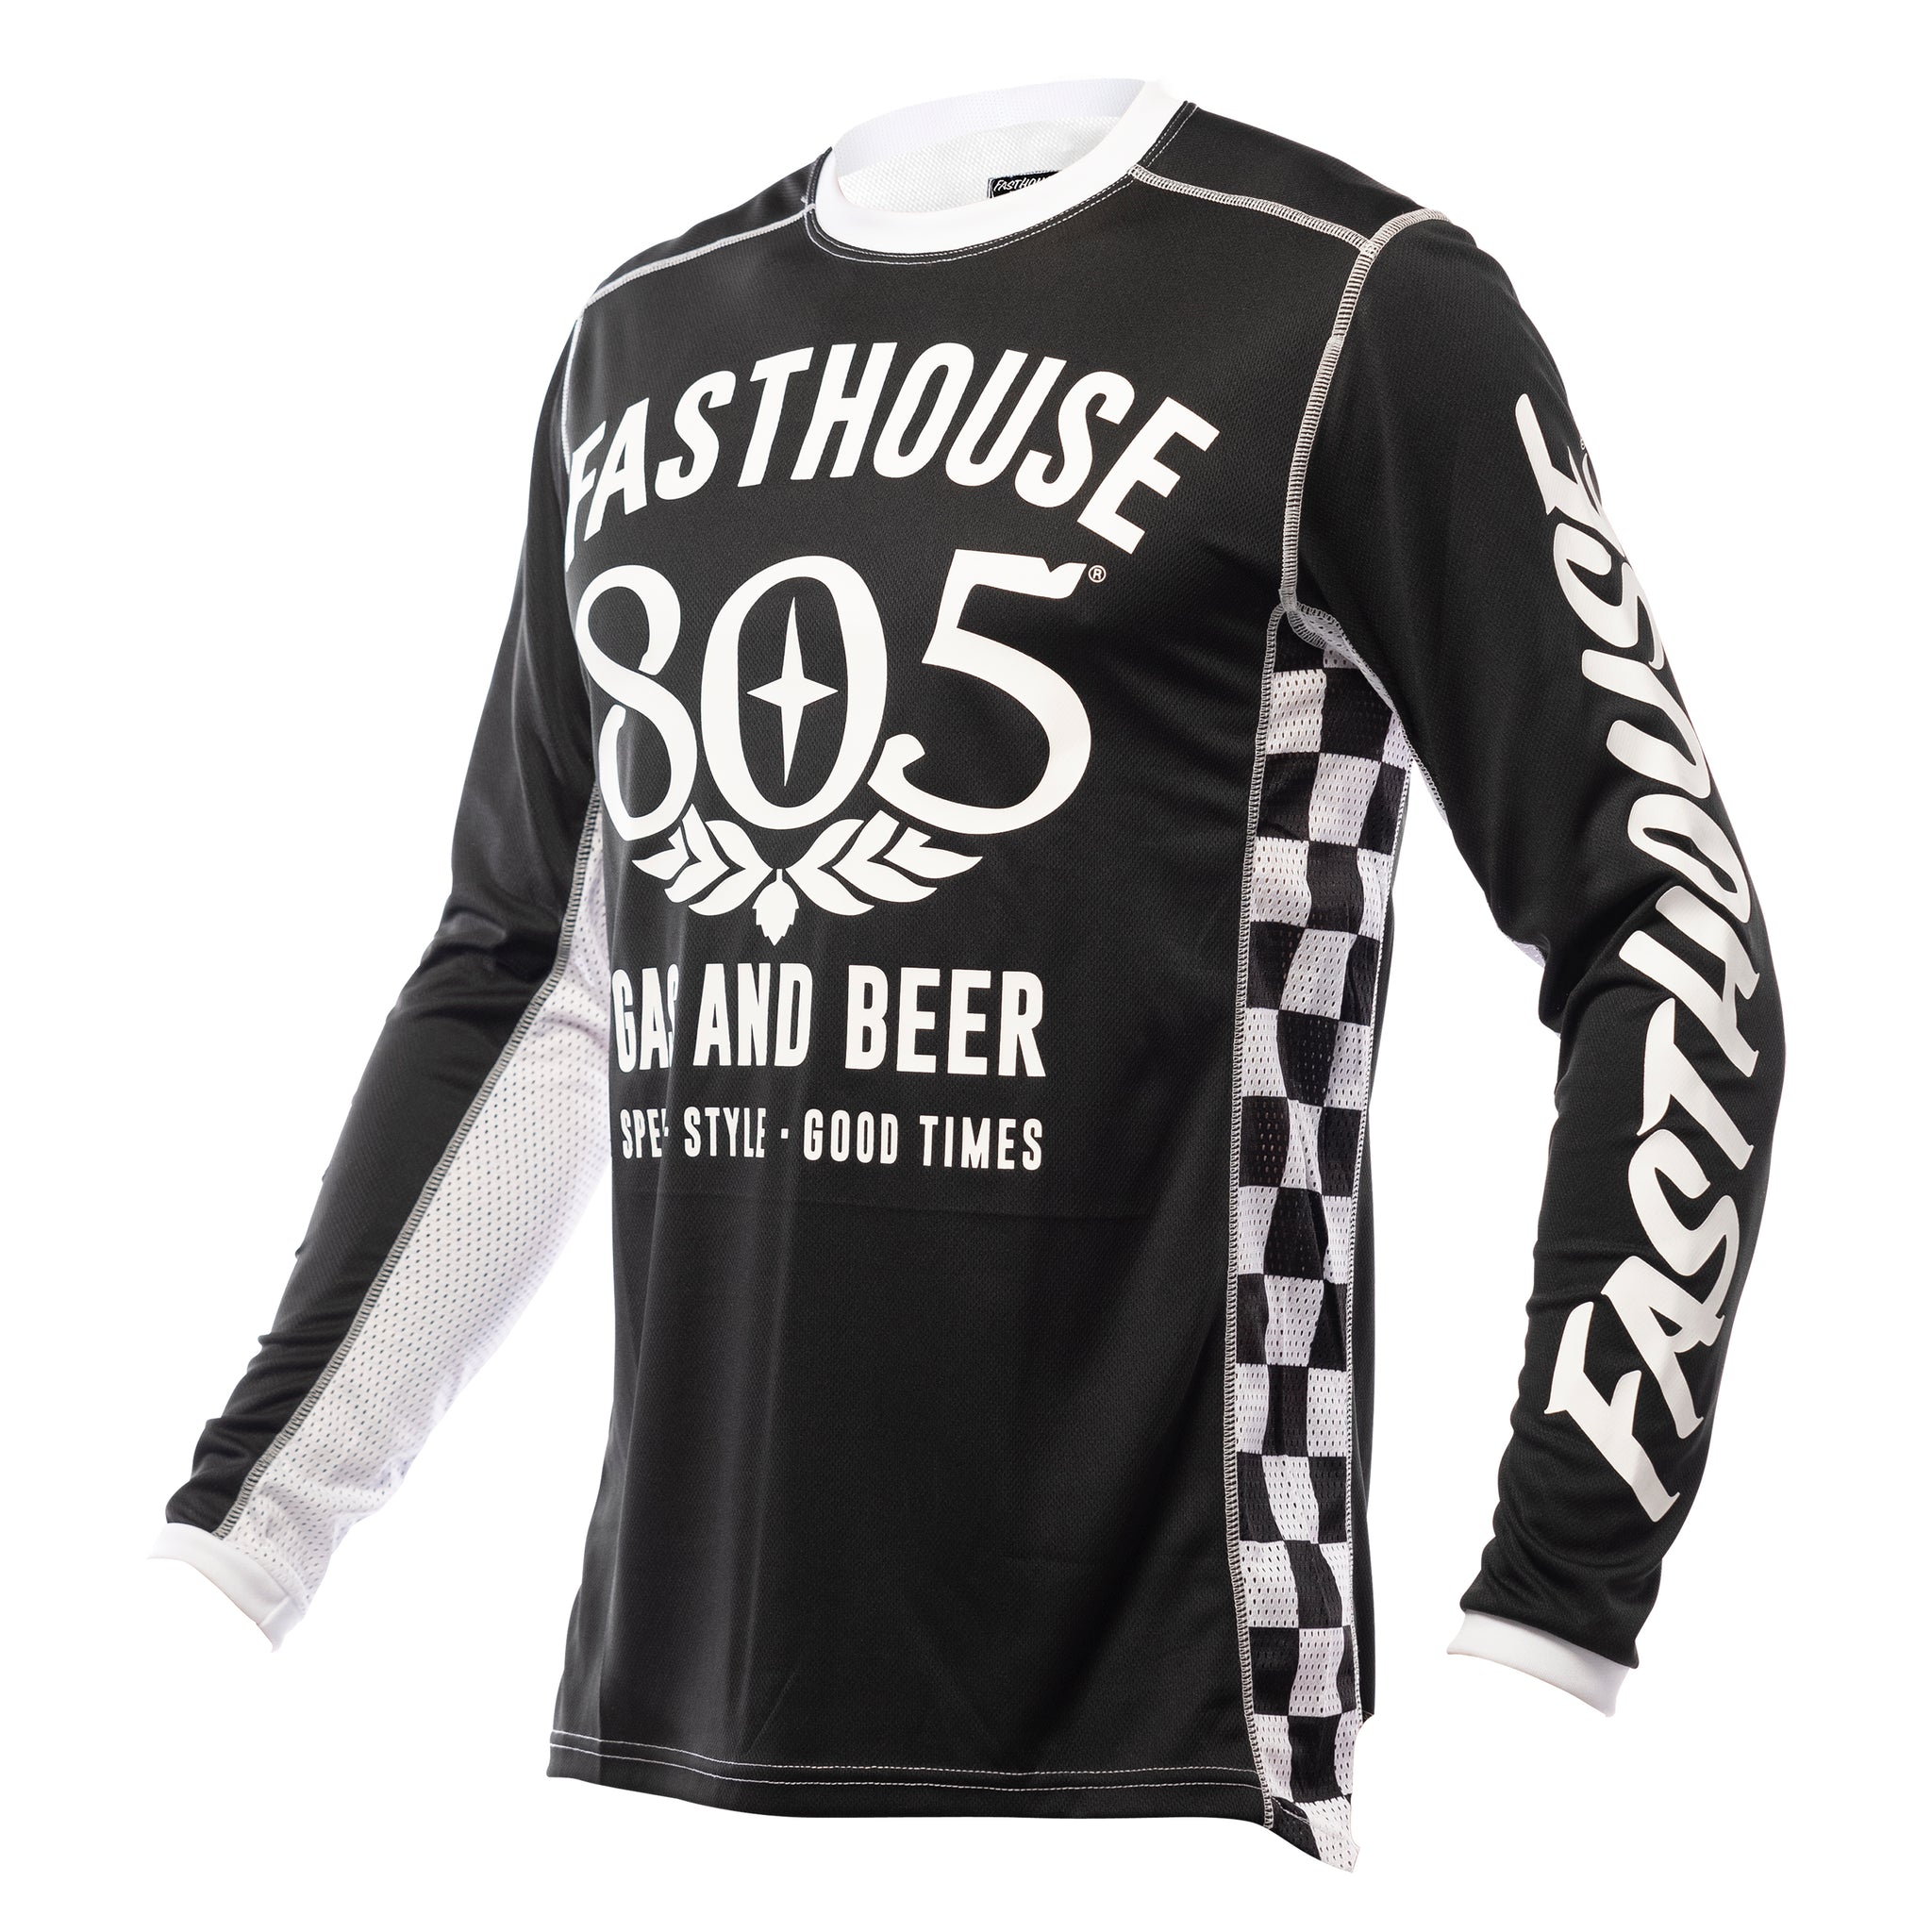 Grindhouse 805 Long Sleeve Jersey